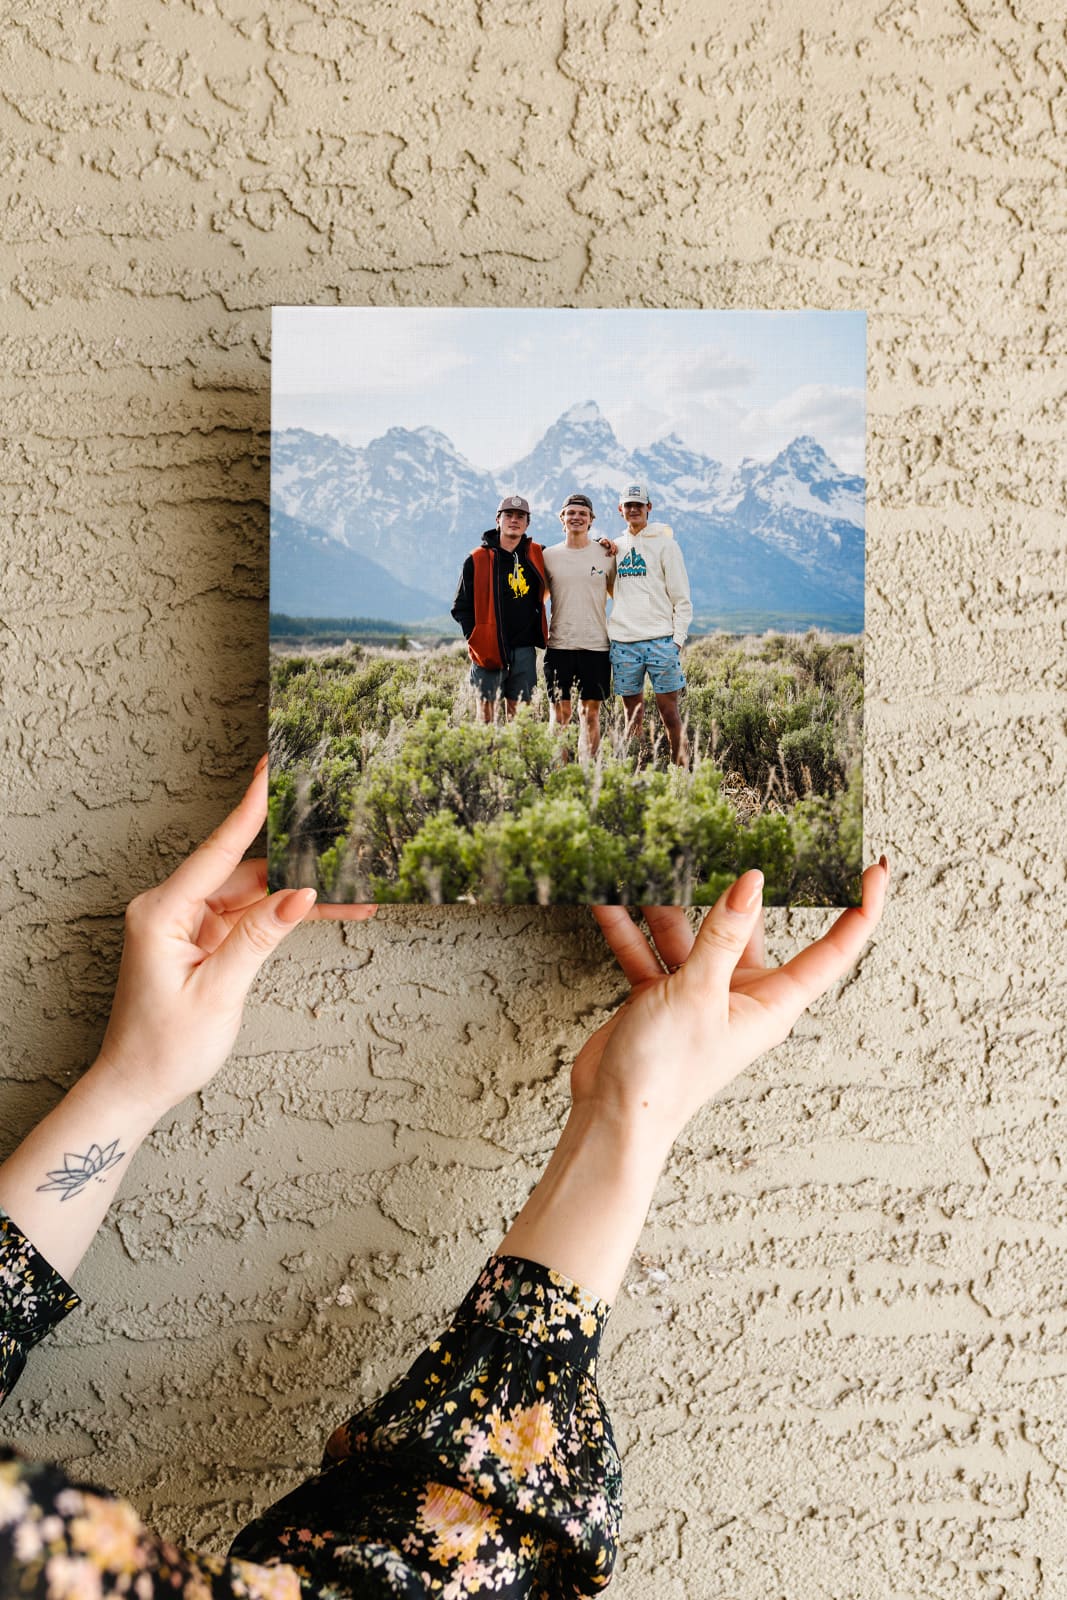 Canvas print of friends on a camping trip.